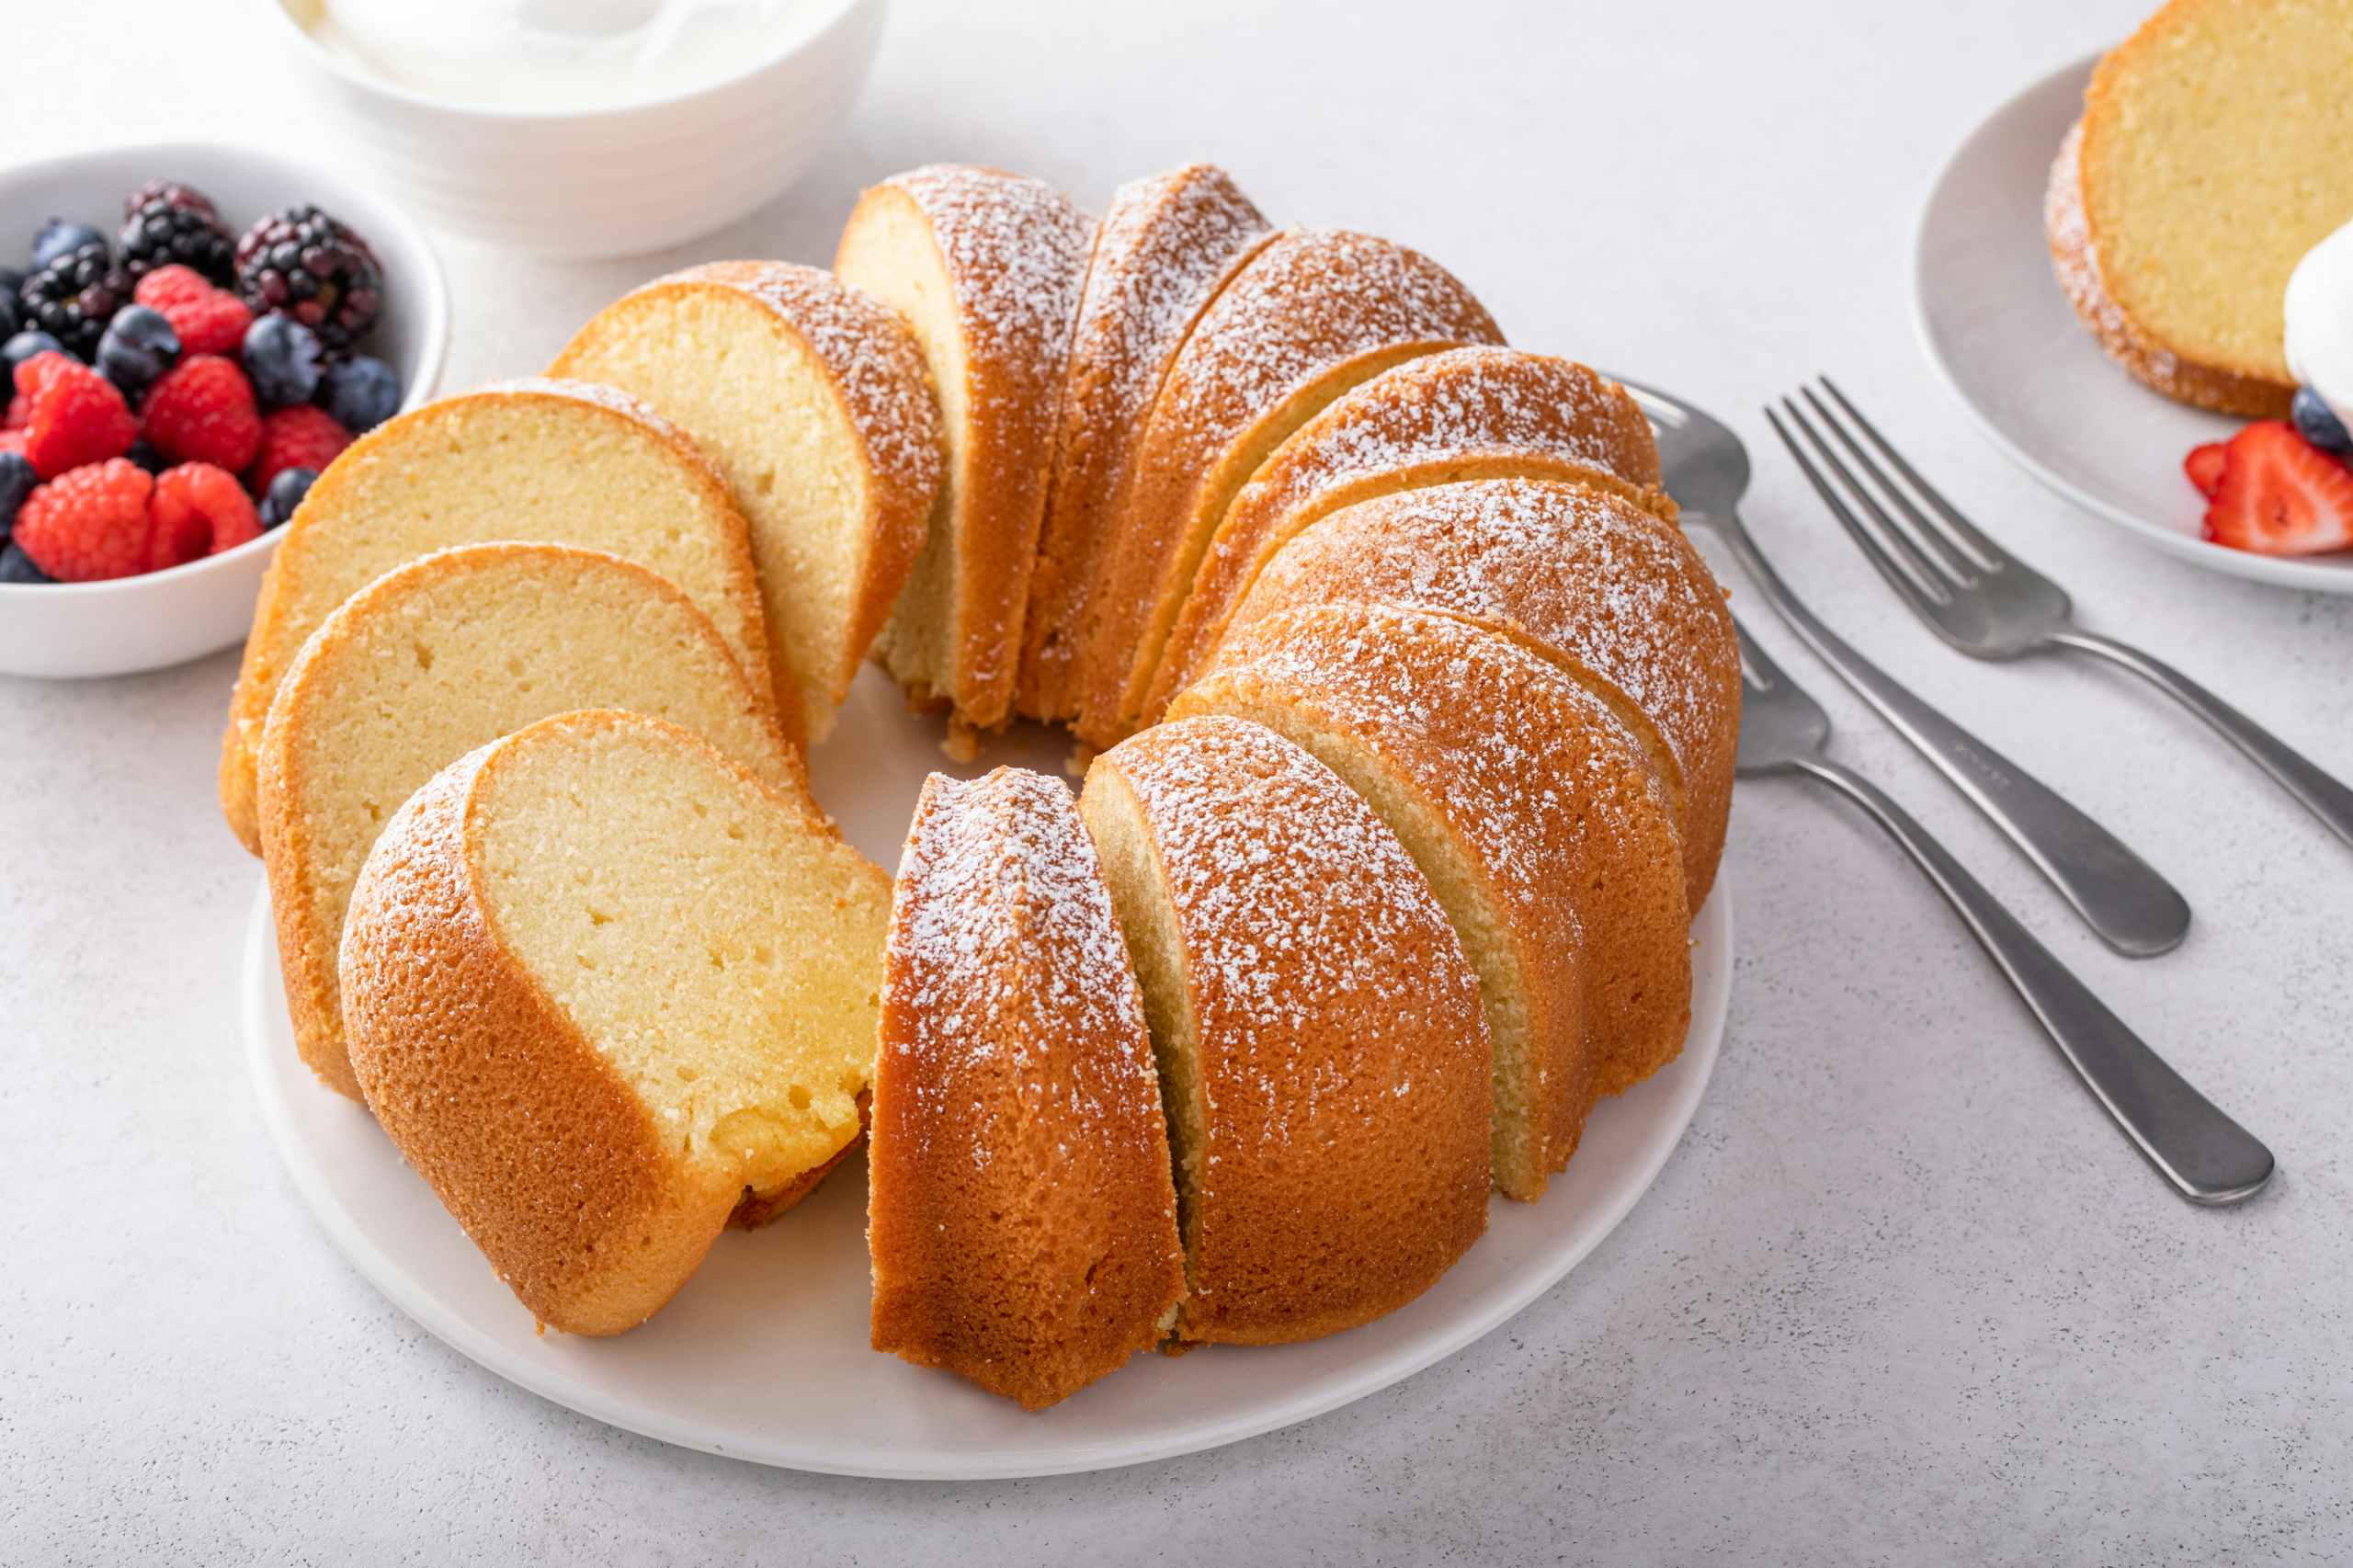 A light and airy champagne pound cake cut up into servings